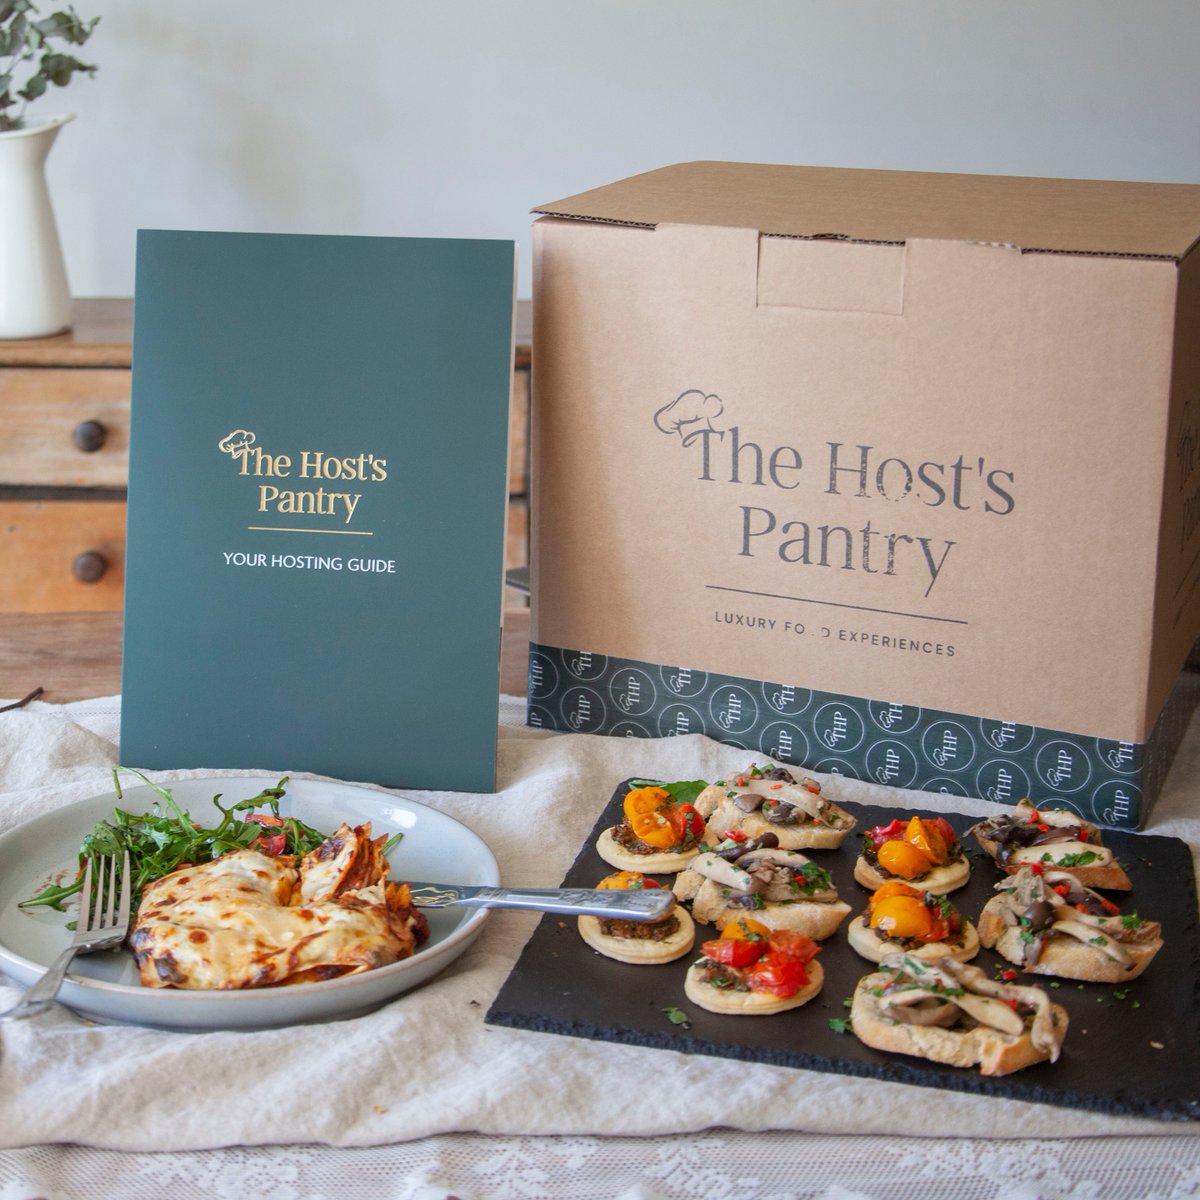 Orders close tonight for Easter weekend!

Mix and match any of our starters, mains and desserts to create your perfect Easter menu. Don't forget it's nationwide delivery and free delivery for orders over £70.

#easterweekend #eastermenu #recipebox #hostspantry